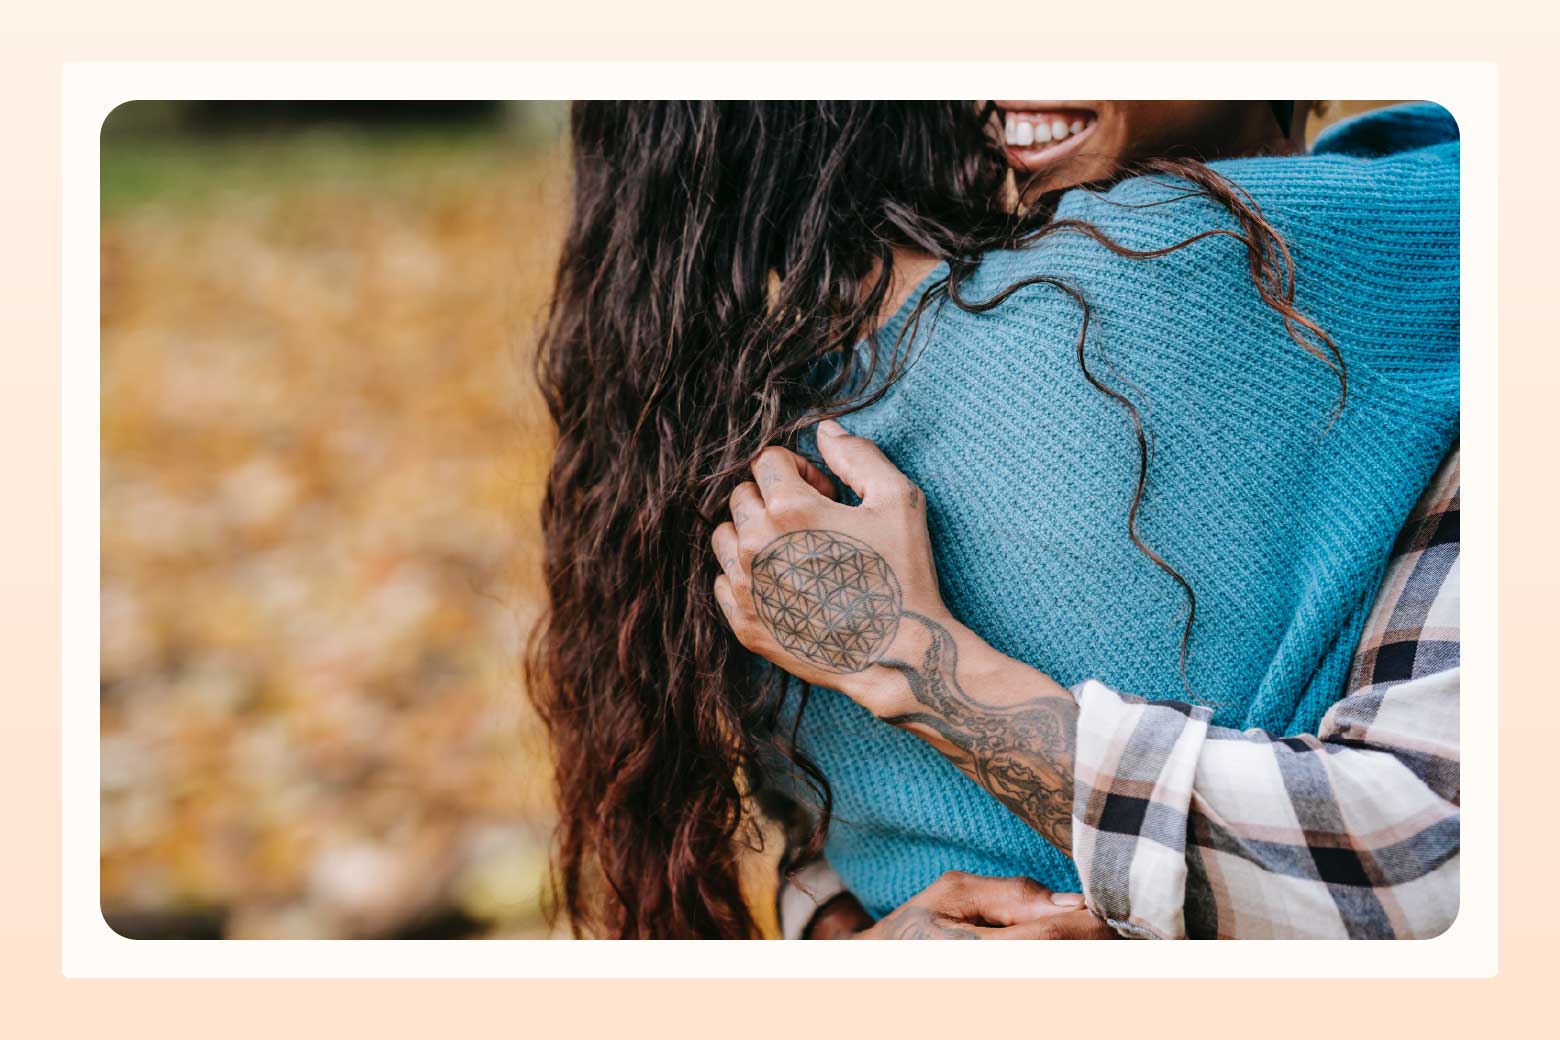 Cropped image showing only the back of one person and the tattooed arm and smile of another person as they embrace 